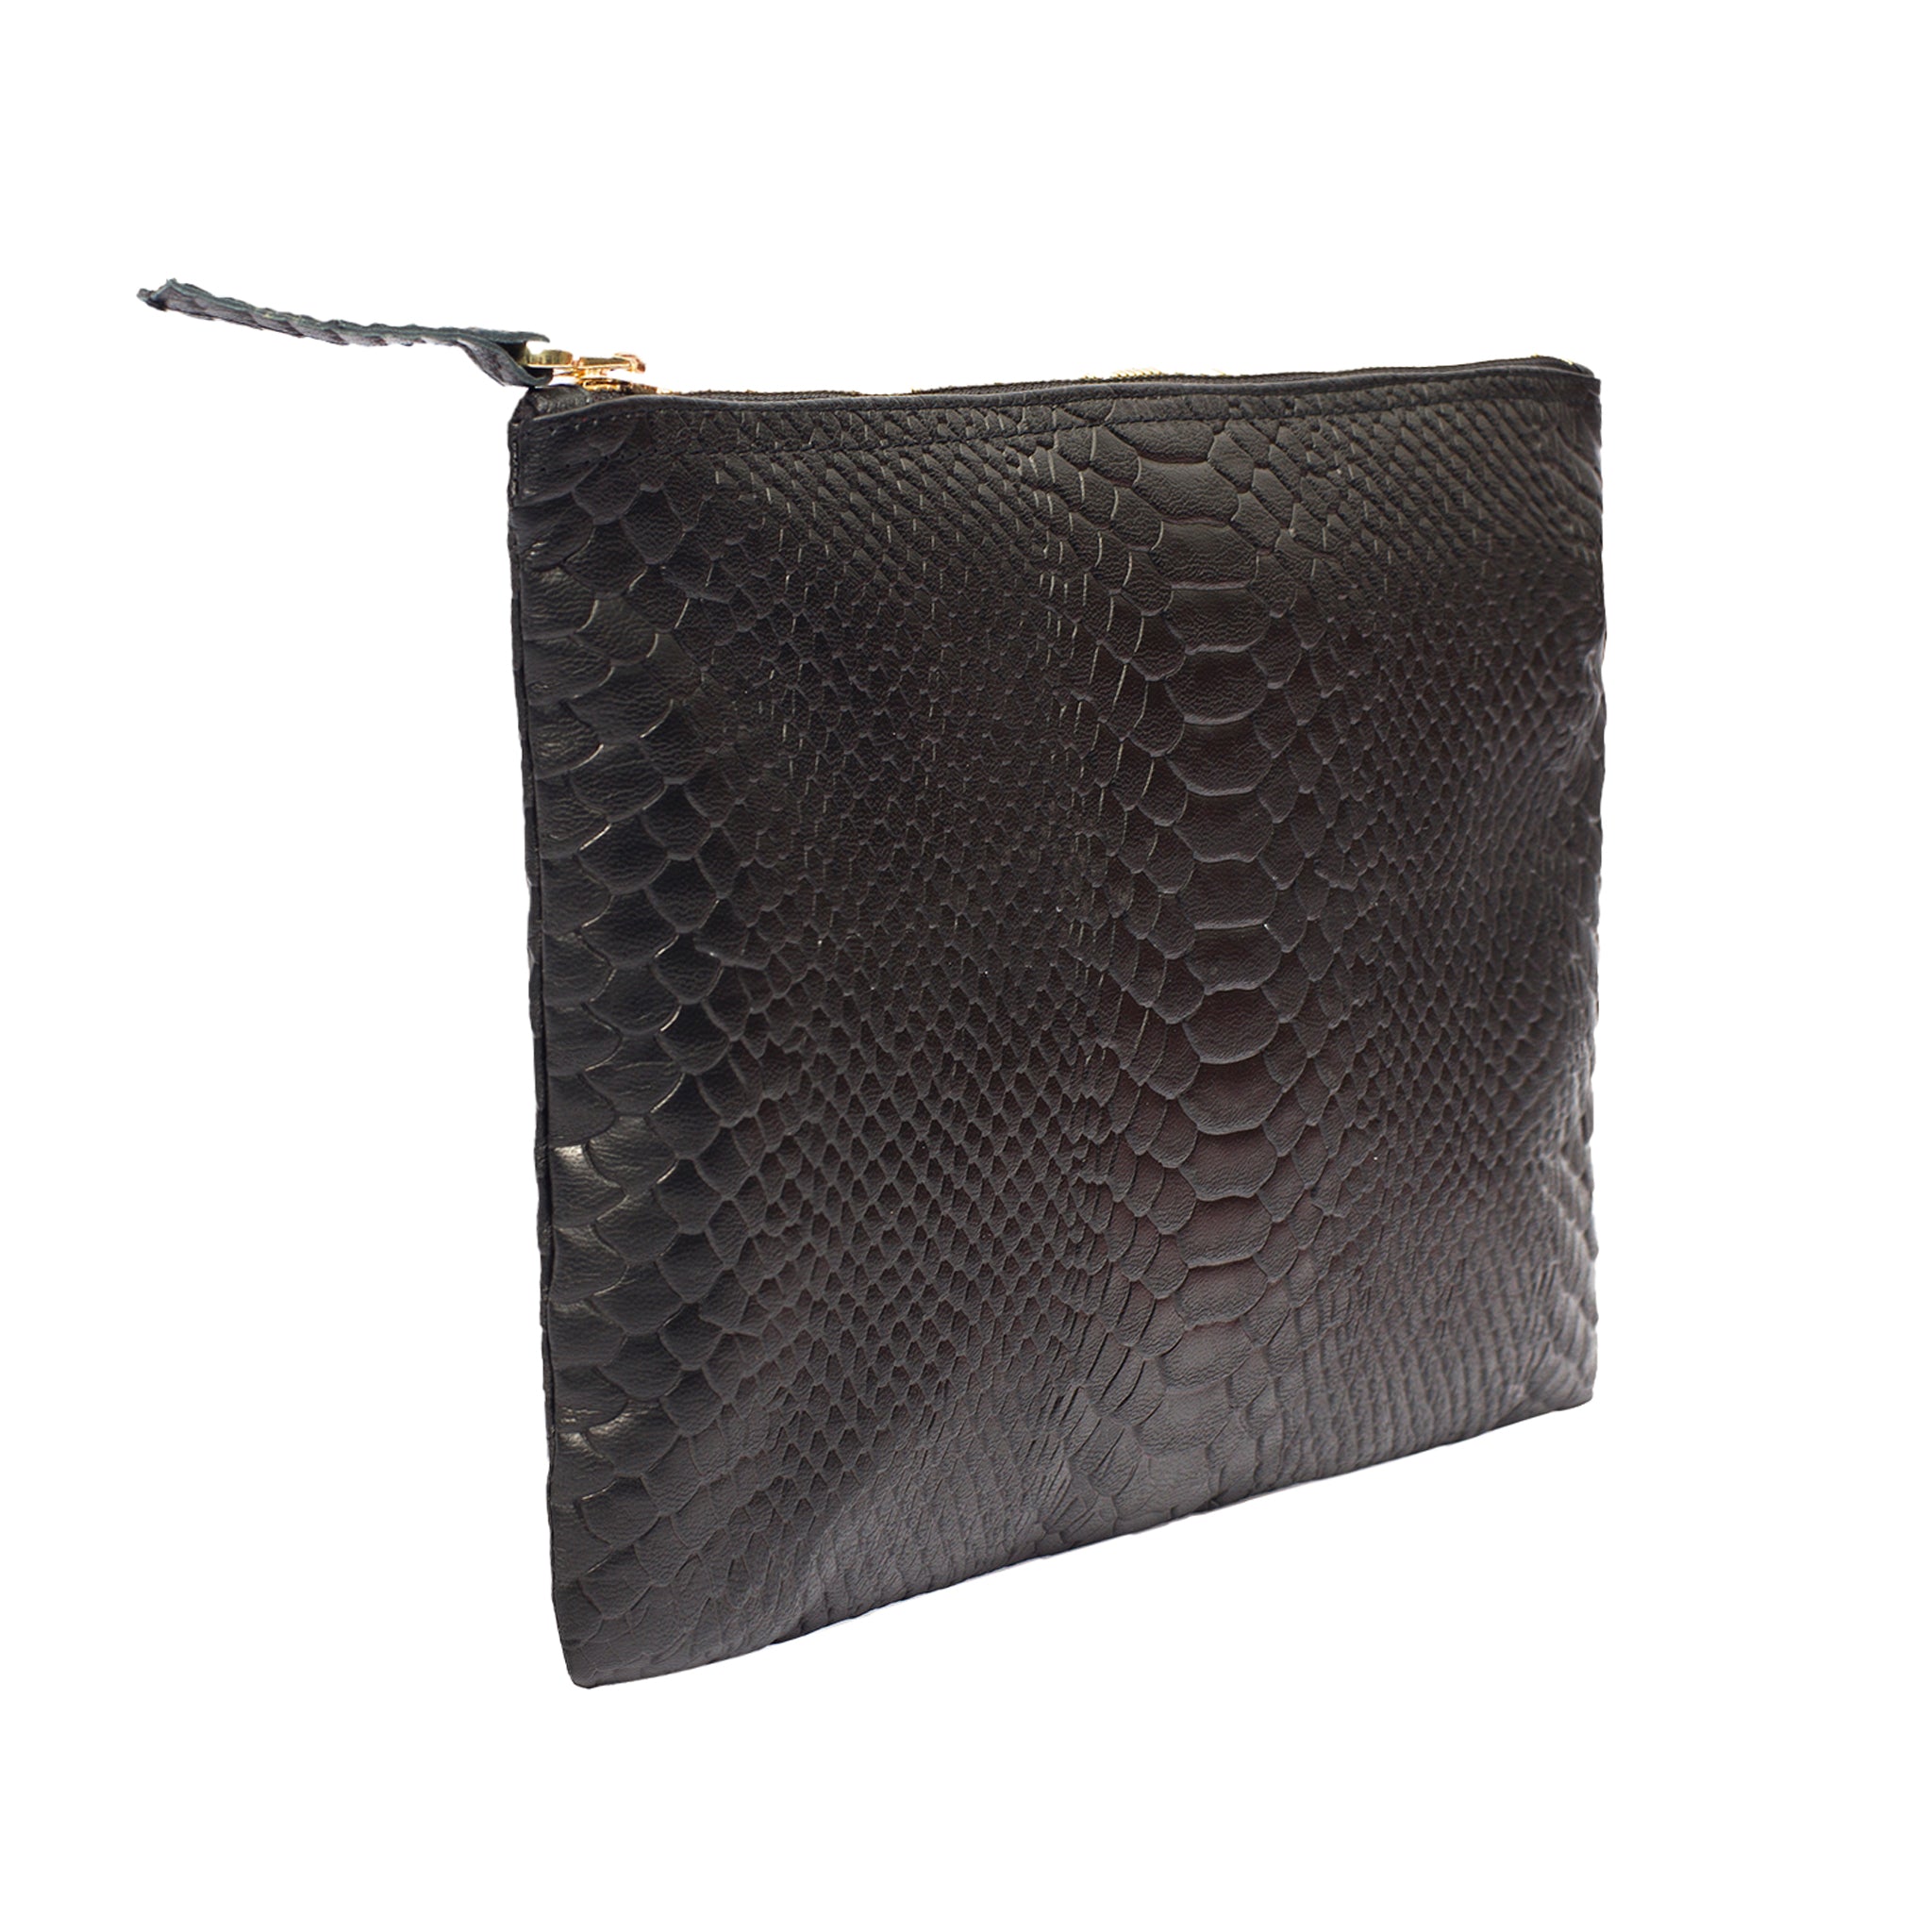 Side view Black Flat Wallet Clutch Genuine Leather-Python Embossed Texture